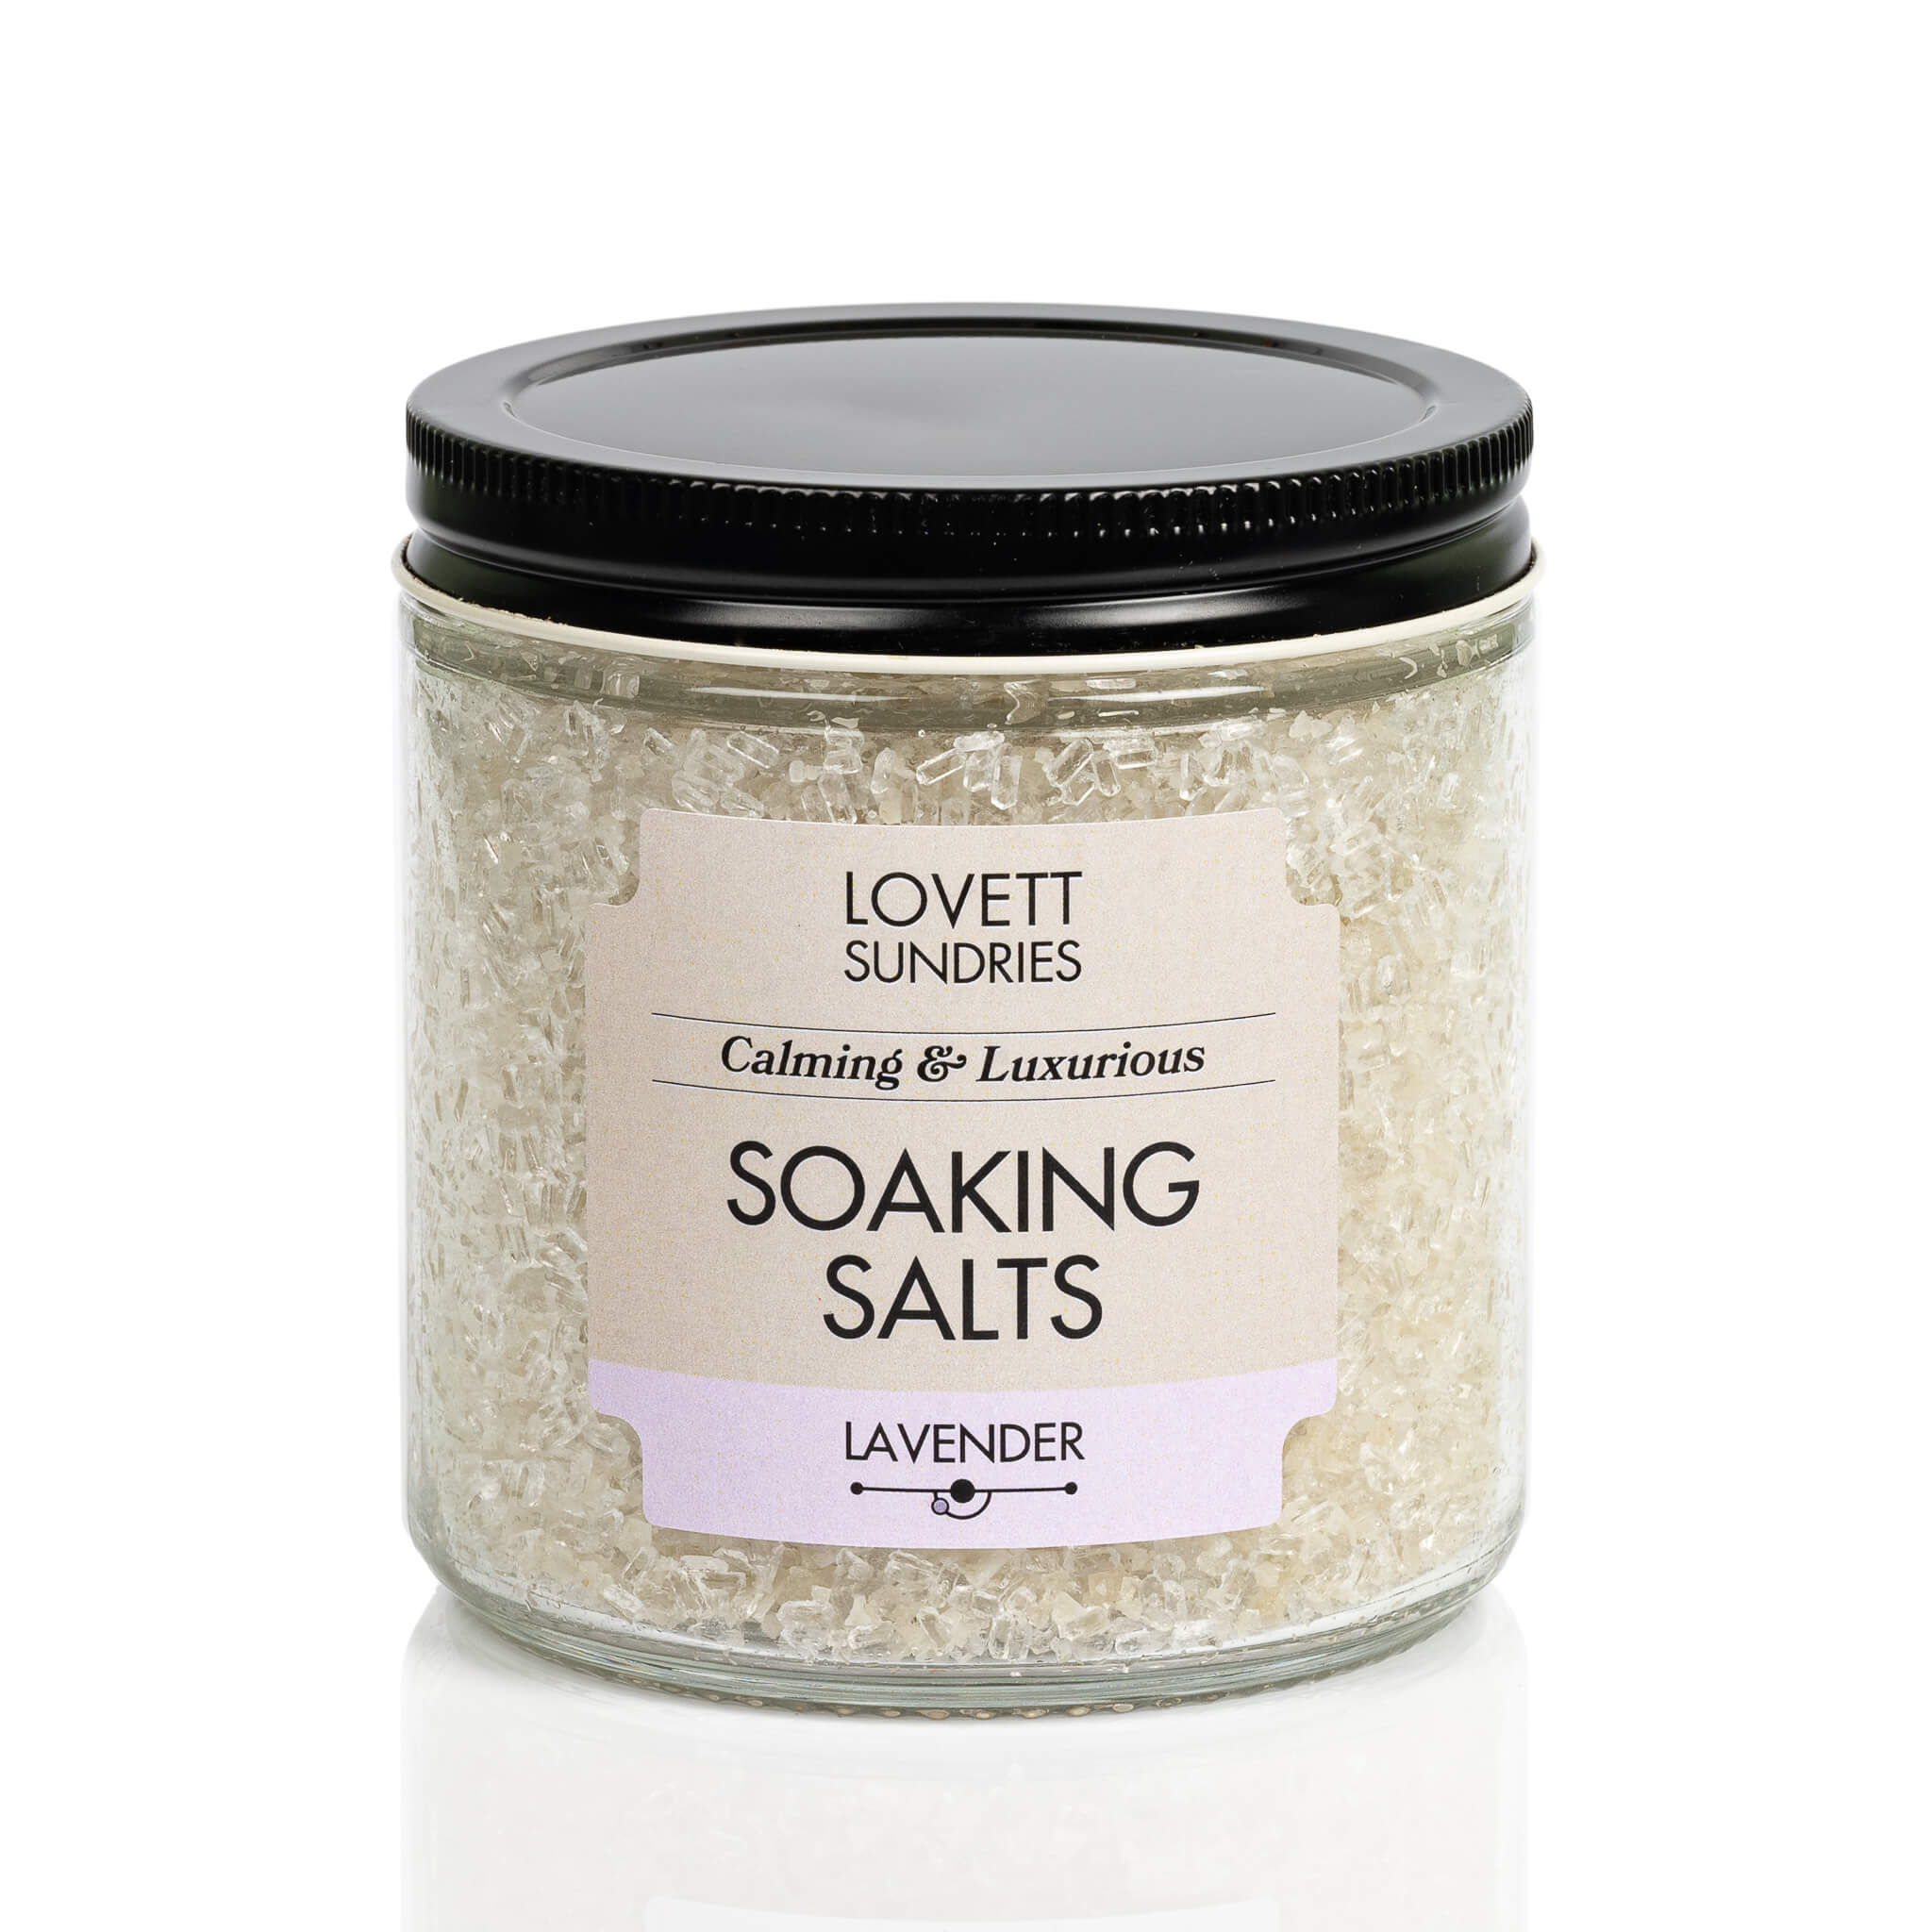 Lavender scented all natural calming and luxurious bath soaking salts in a recyclable glass jar. 